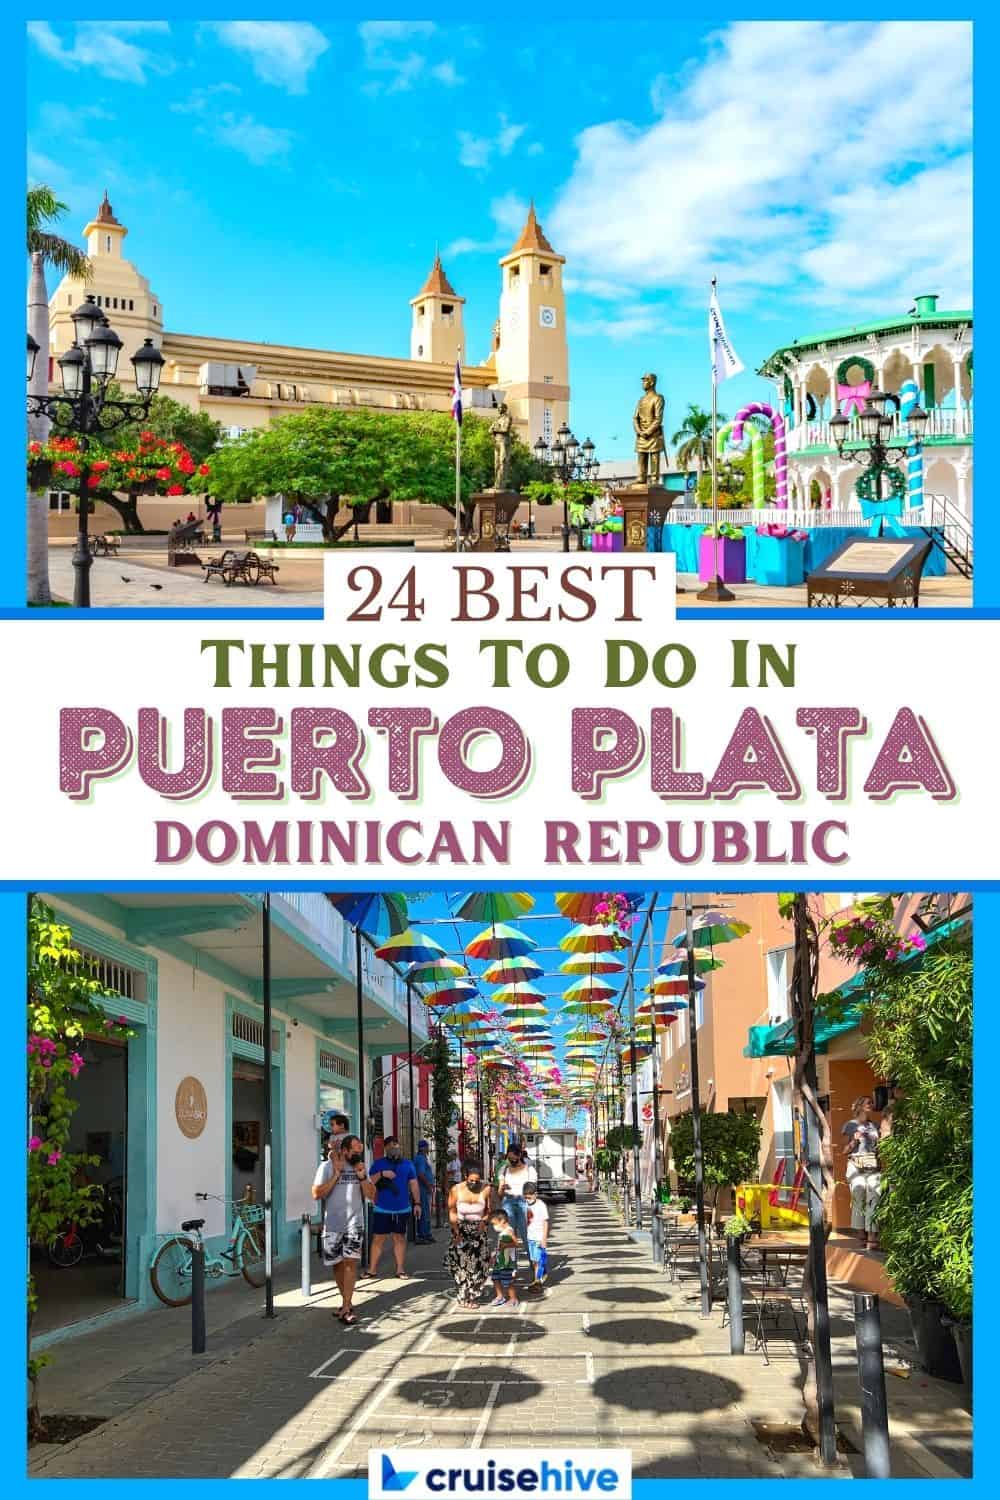 Best Things to Do in Puerto Plata, Dominican Republic